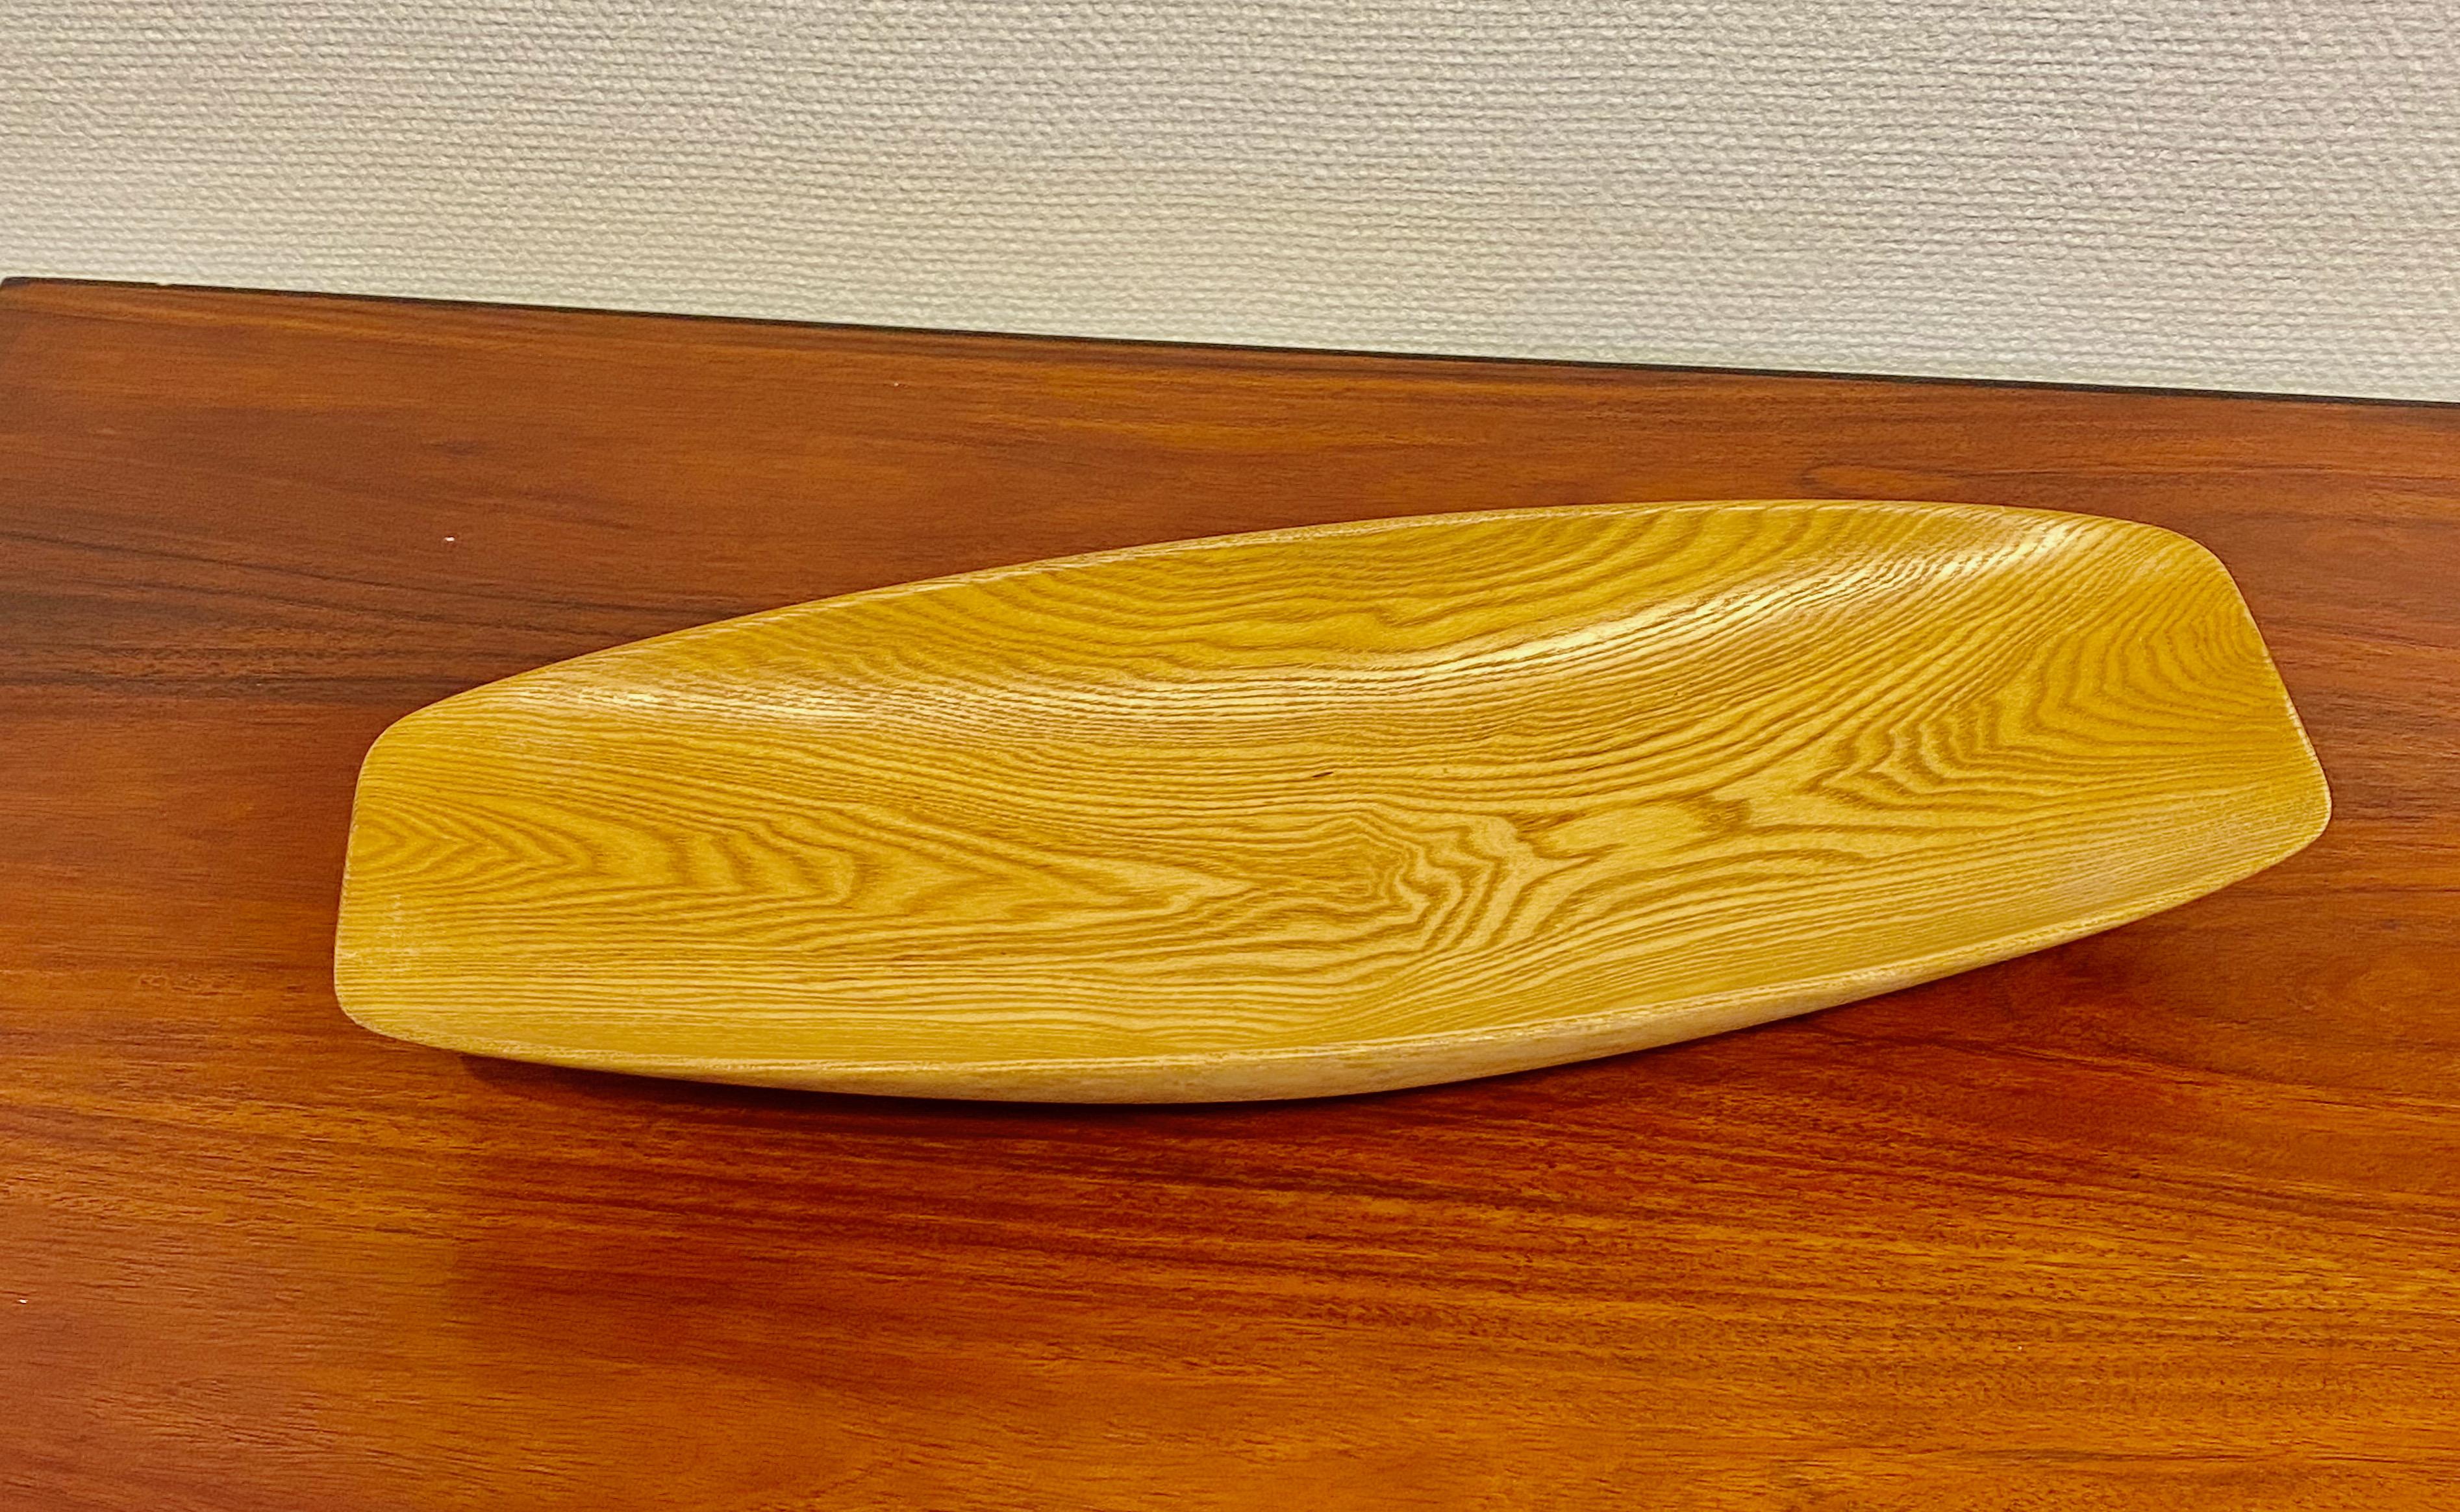 Scandinavian Modern Large and Early Pine Bowl by Swedish Master Johnny Mattsson, 1944 For Sale